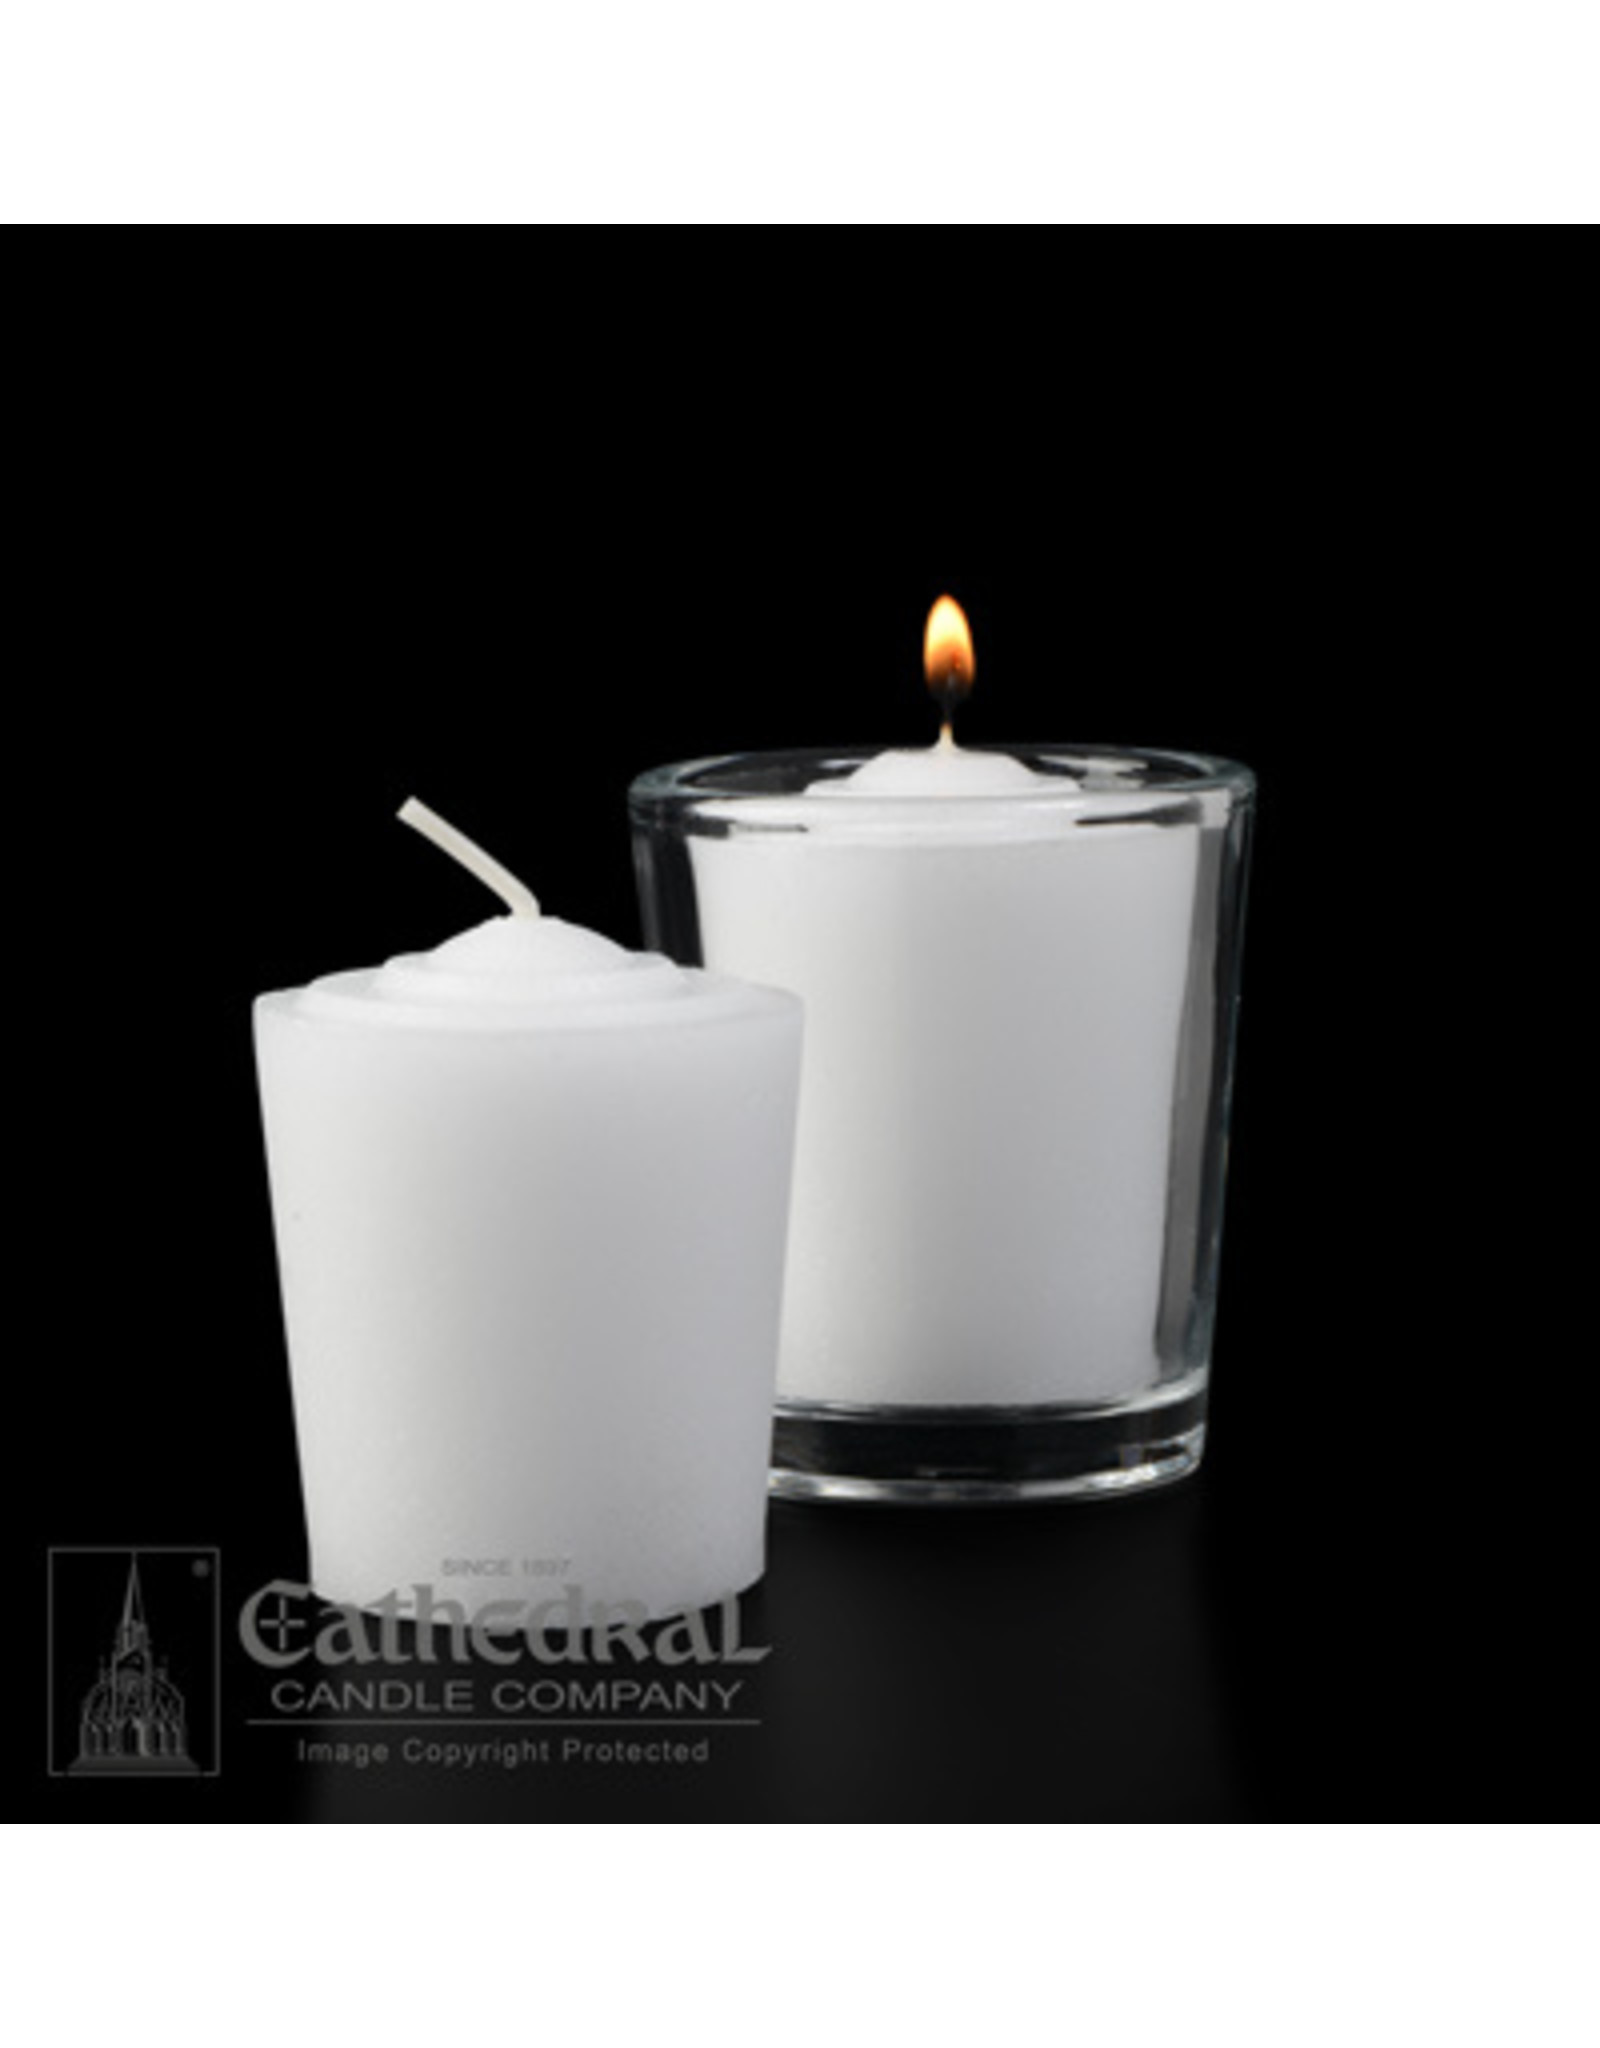 15-Hour Tapered Votive Candles (Case of 4 Boxes)